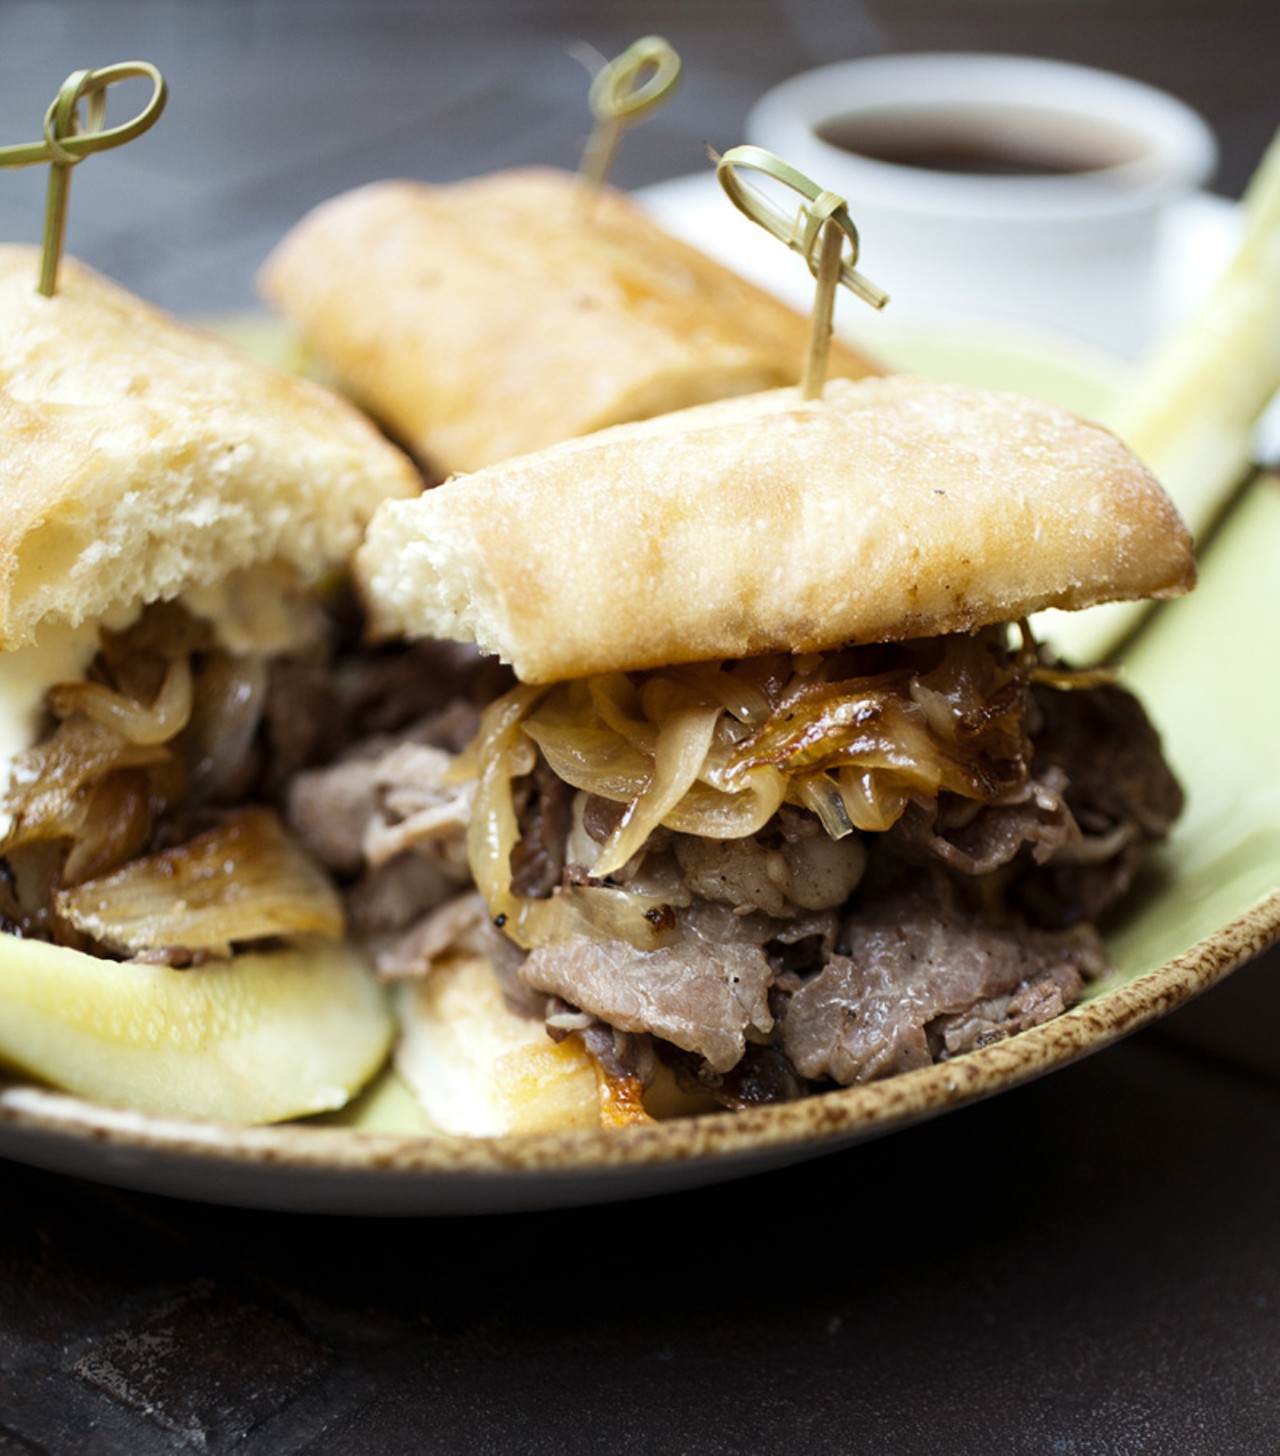 The Wordly Sliders are smaller versions of their St. Louis Philly, Italian Beef and French Dip sandwiches. It is served with au jus and horseradish sauce.